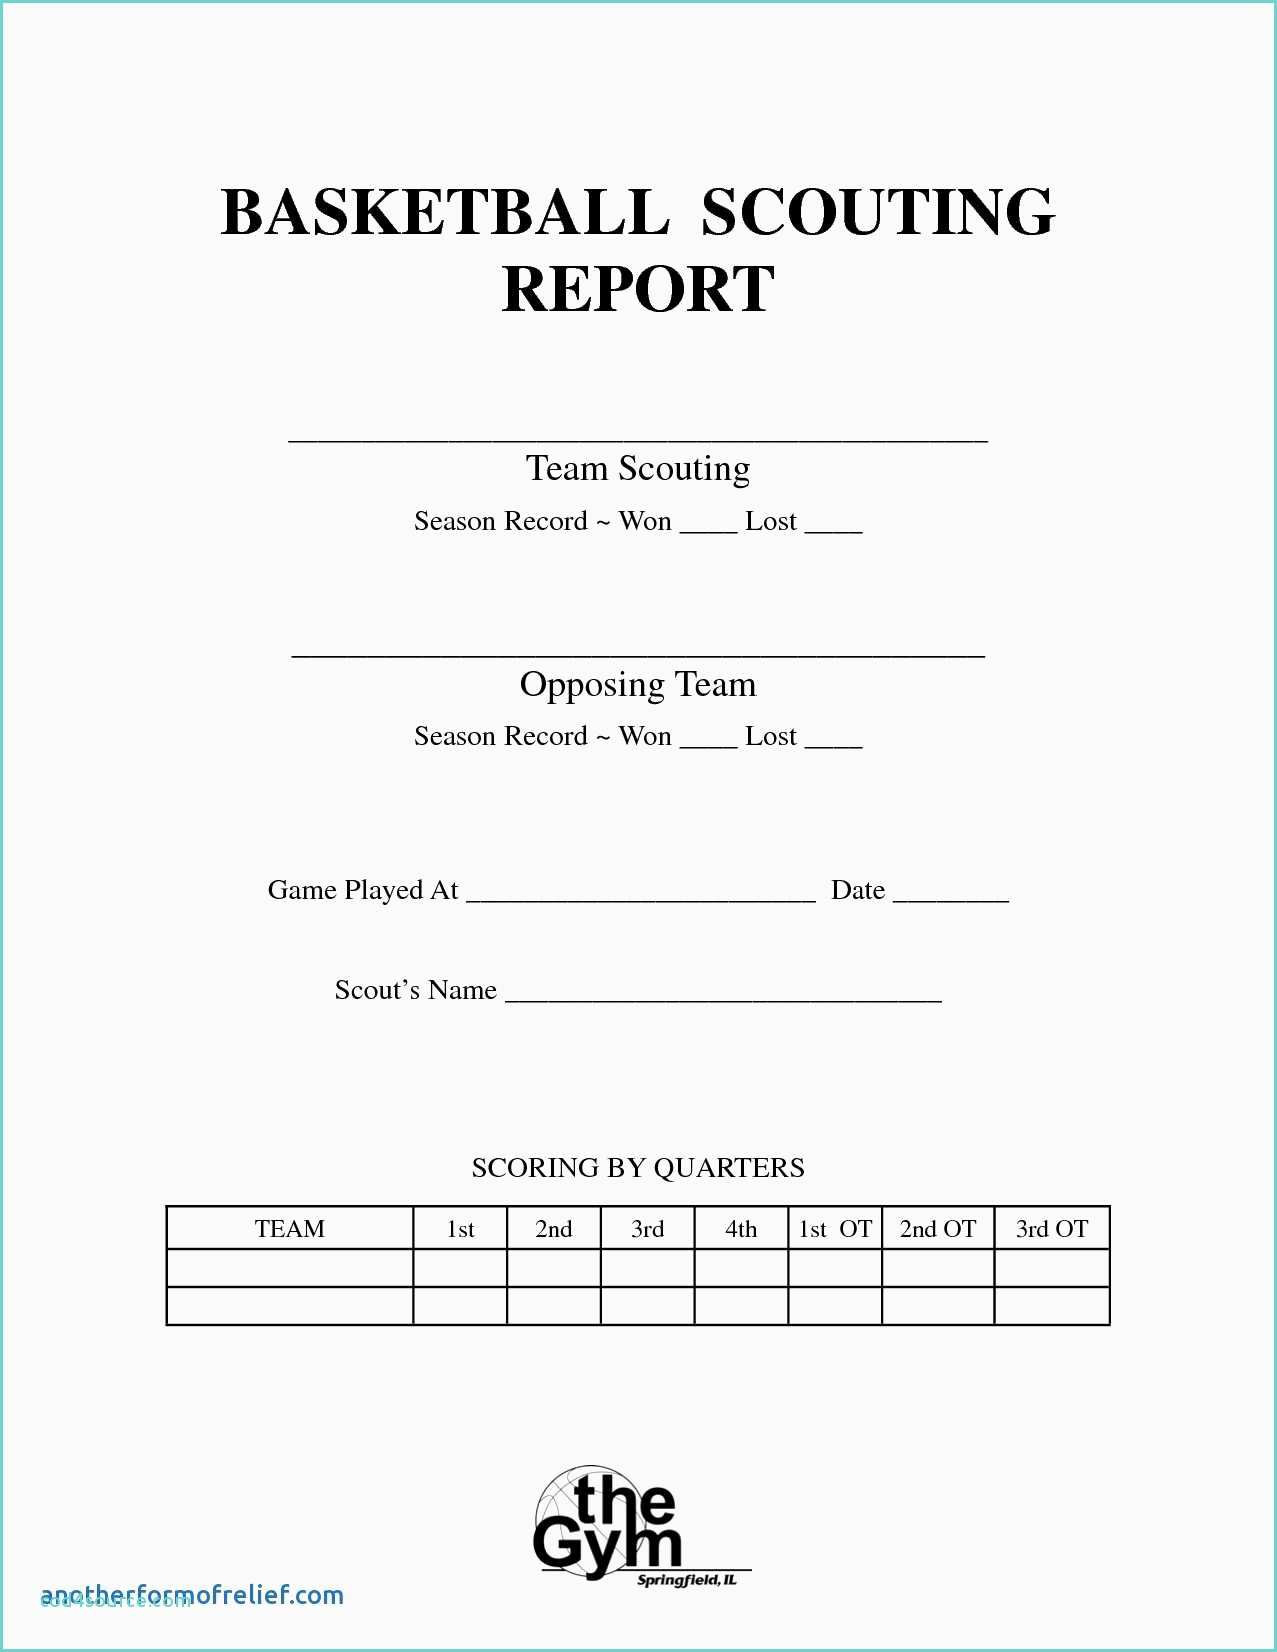 Bowling Spreadsheet And Basketball Scouting Report Template Intended For Scouting Report Basketball Template